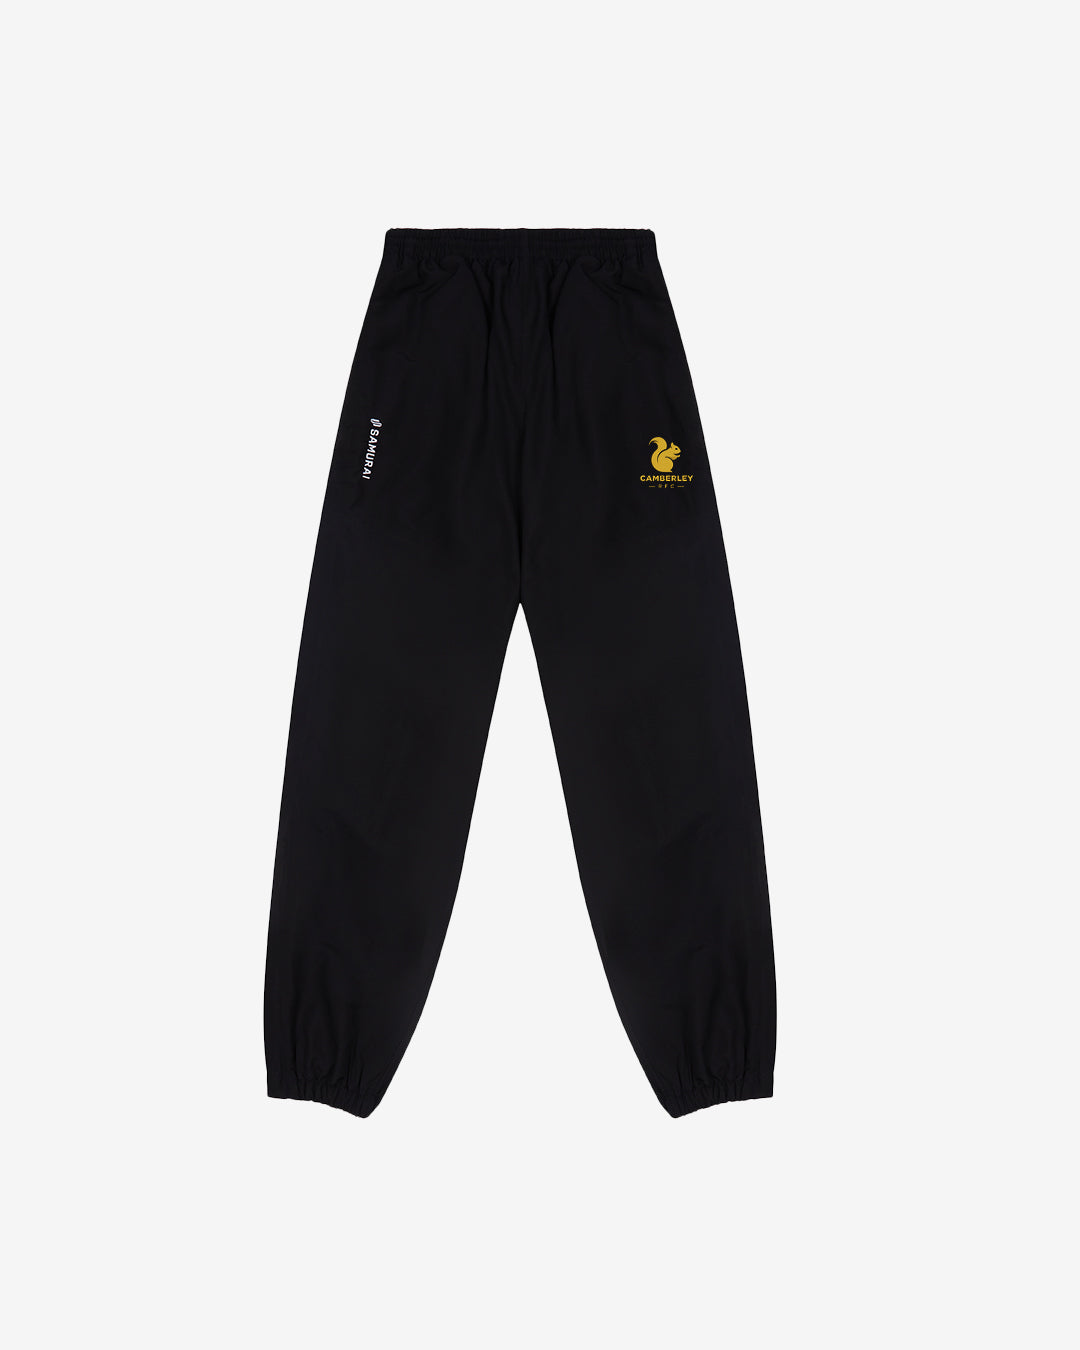 Camberley RFC - EP:0104 - Southland Track Pant 2.0 - Black